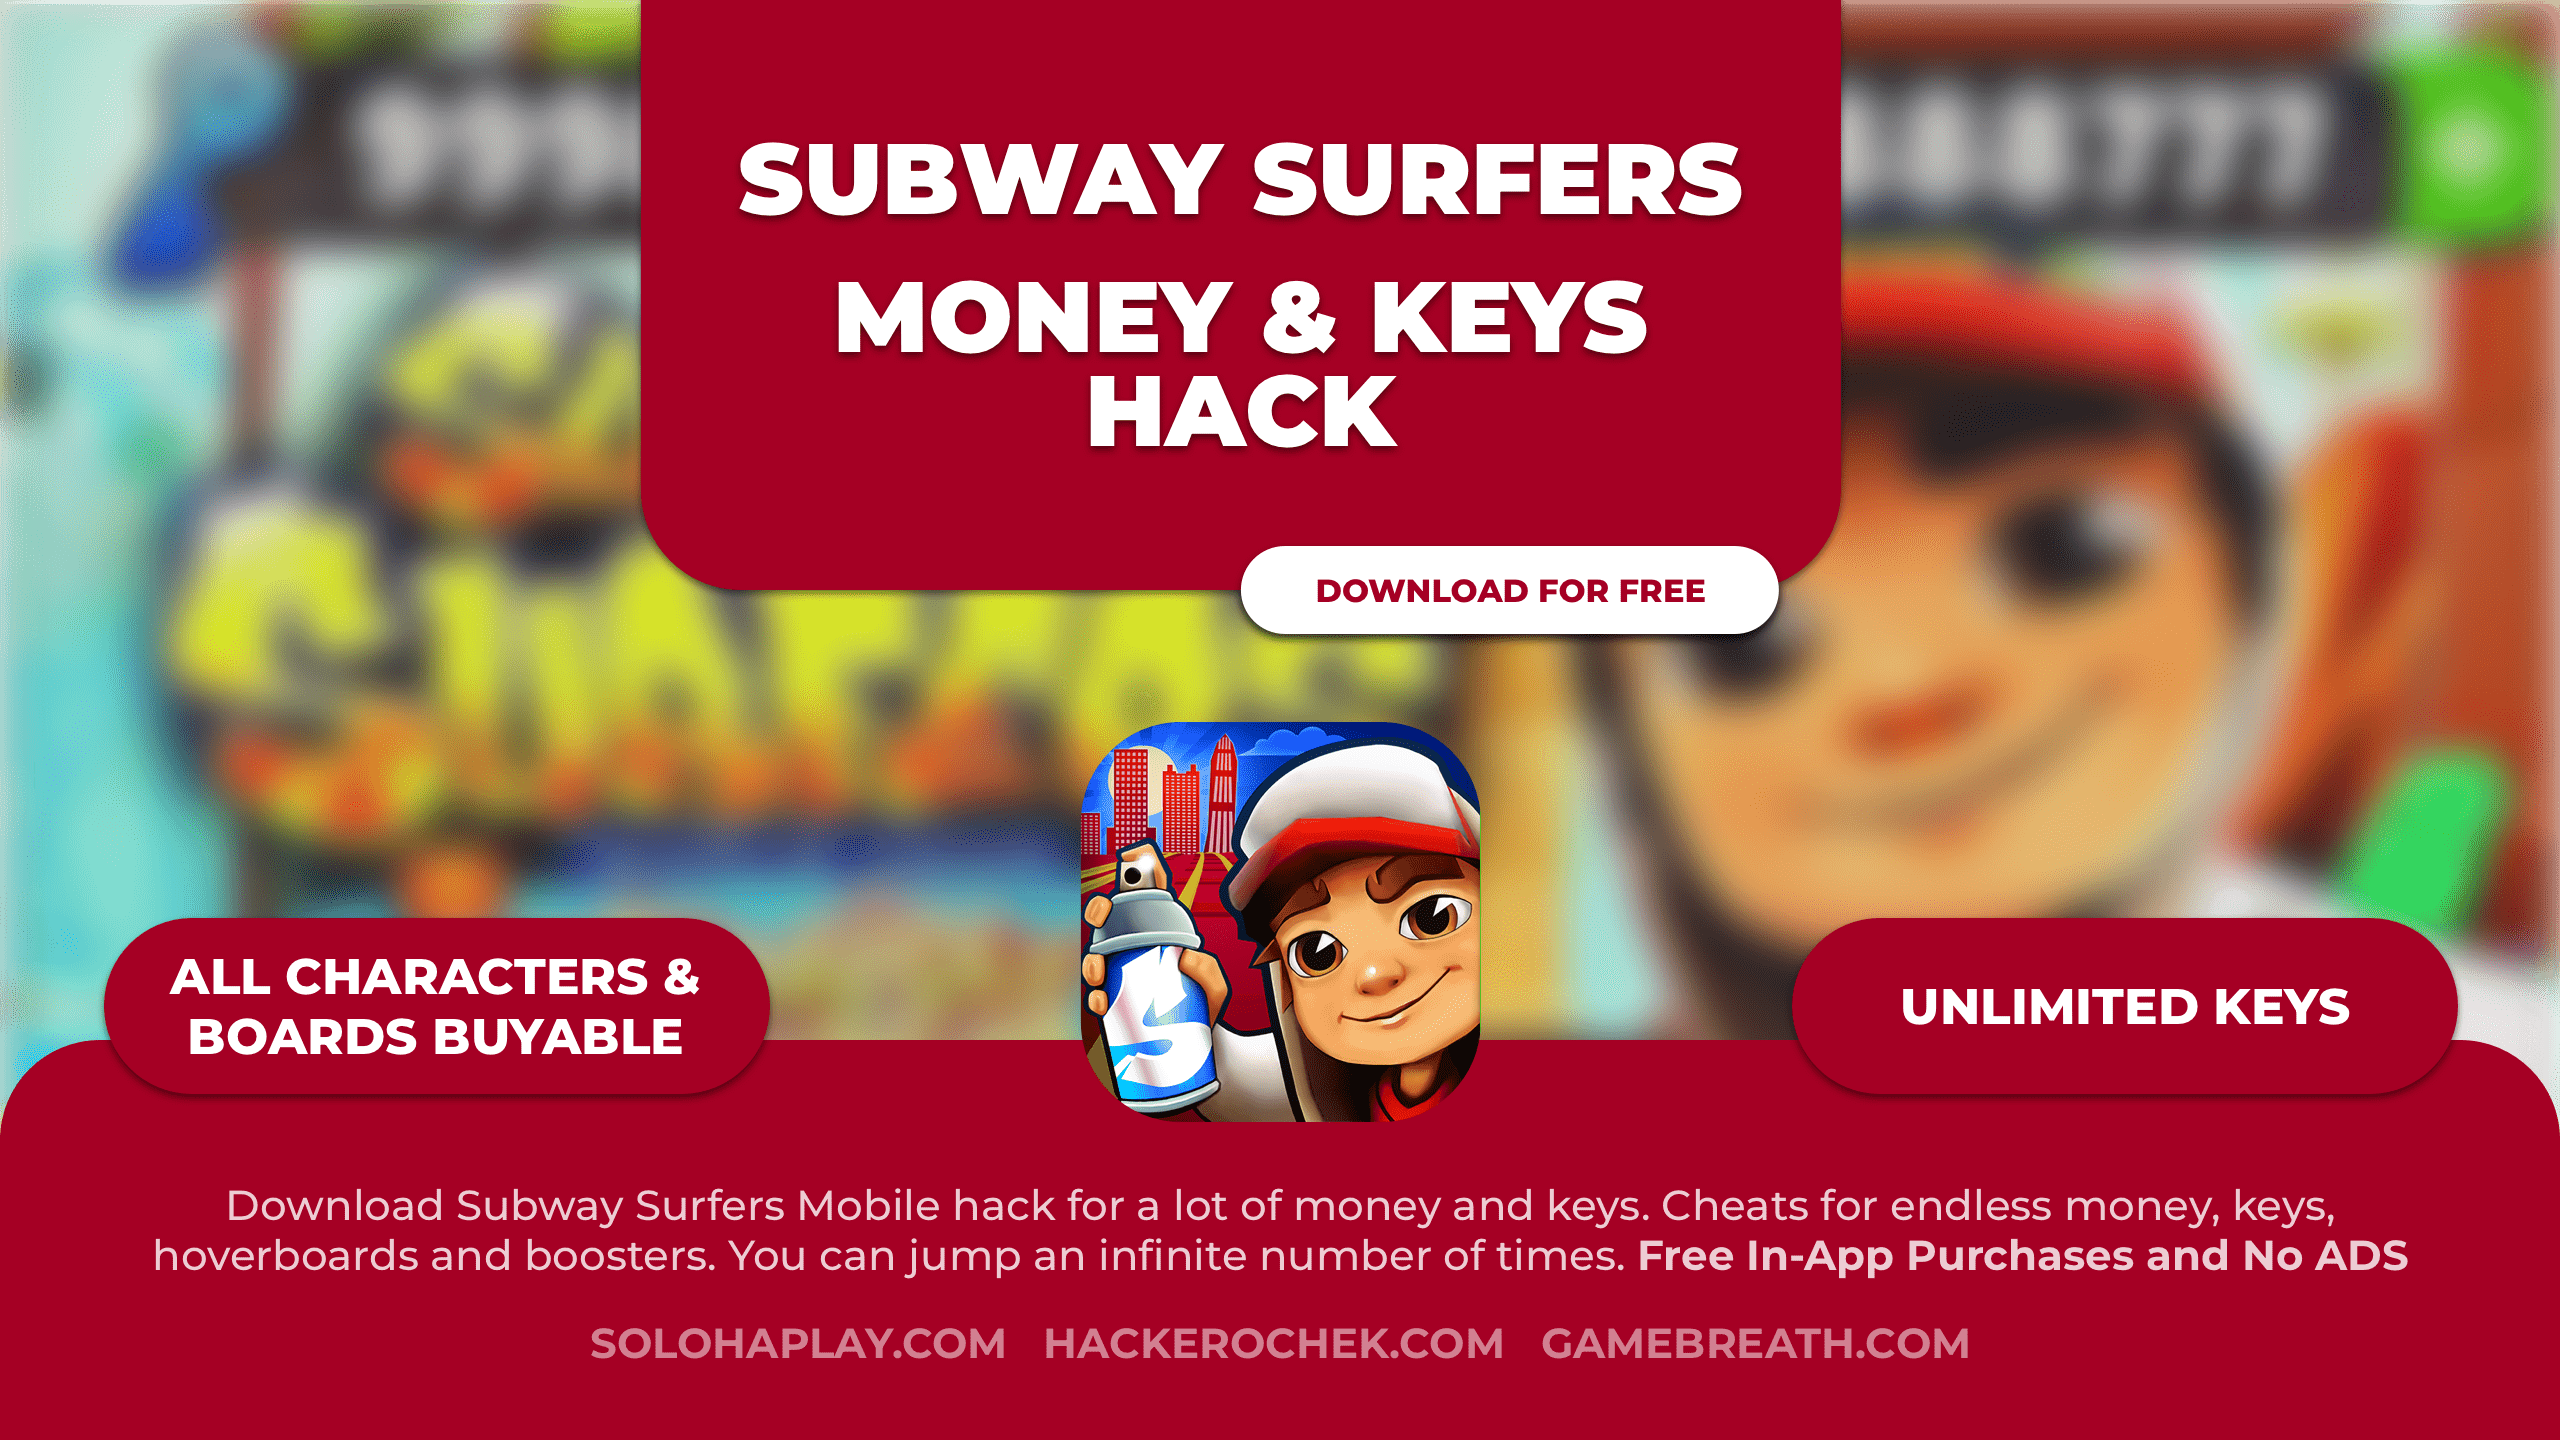 Download Subway Surfers Hack in 2 Minutes! 🔑 Unlimited Keys